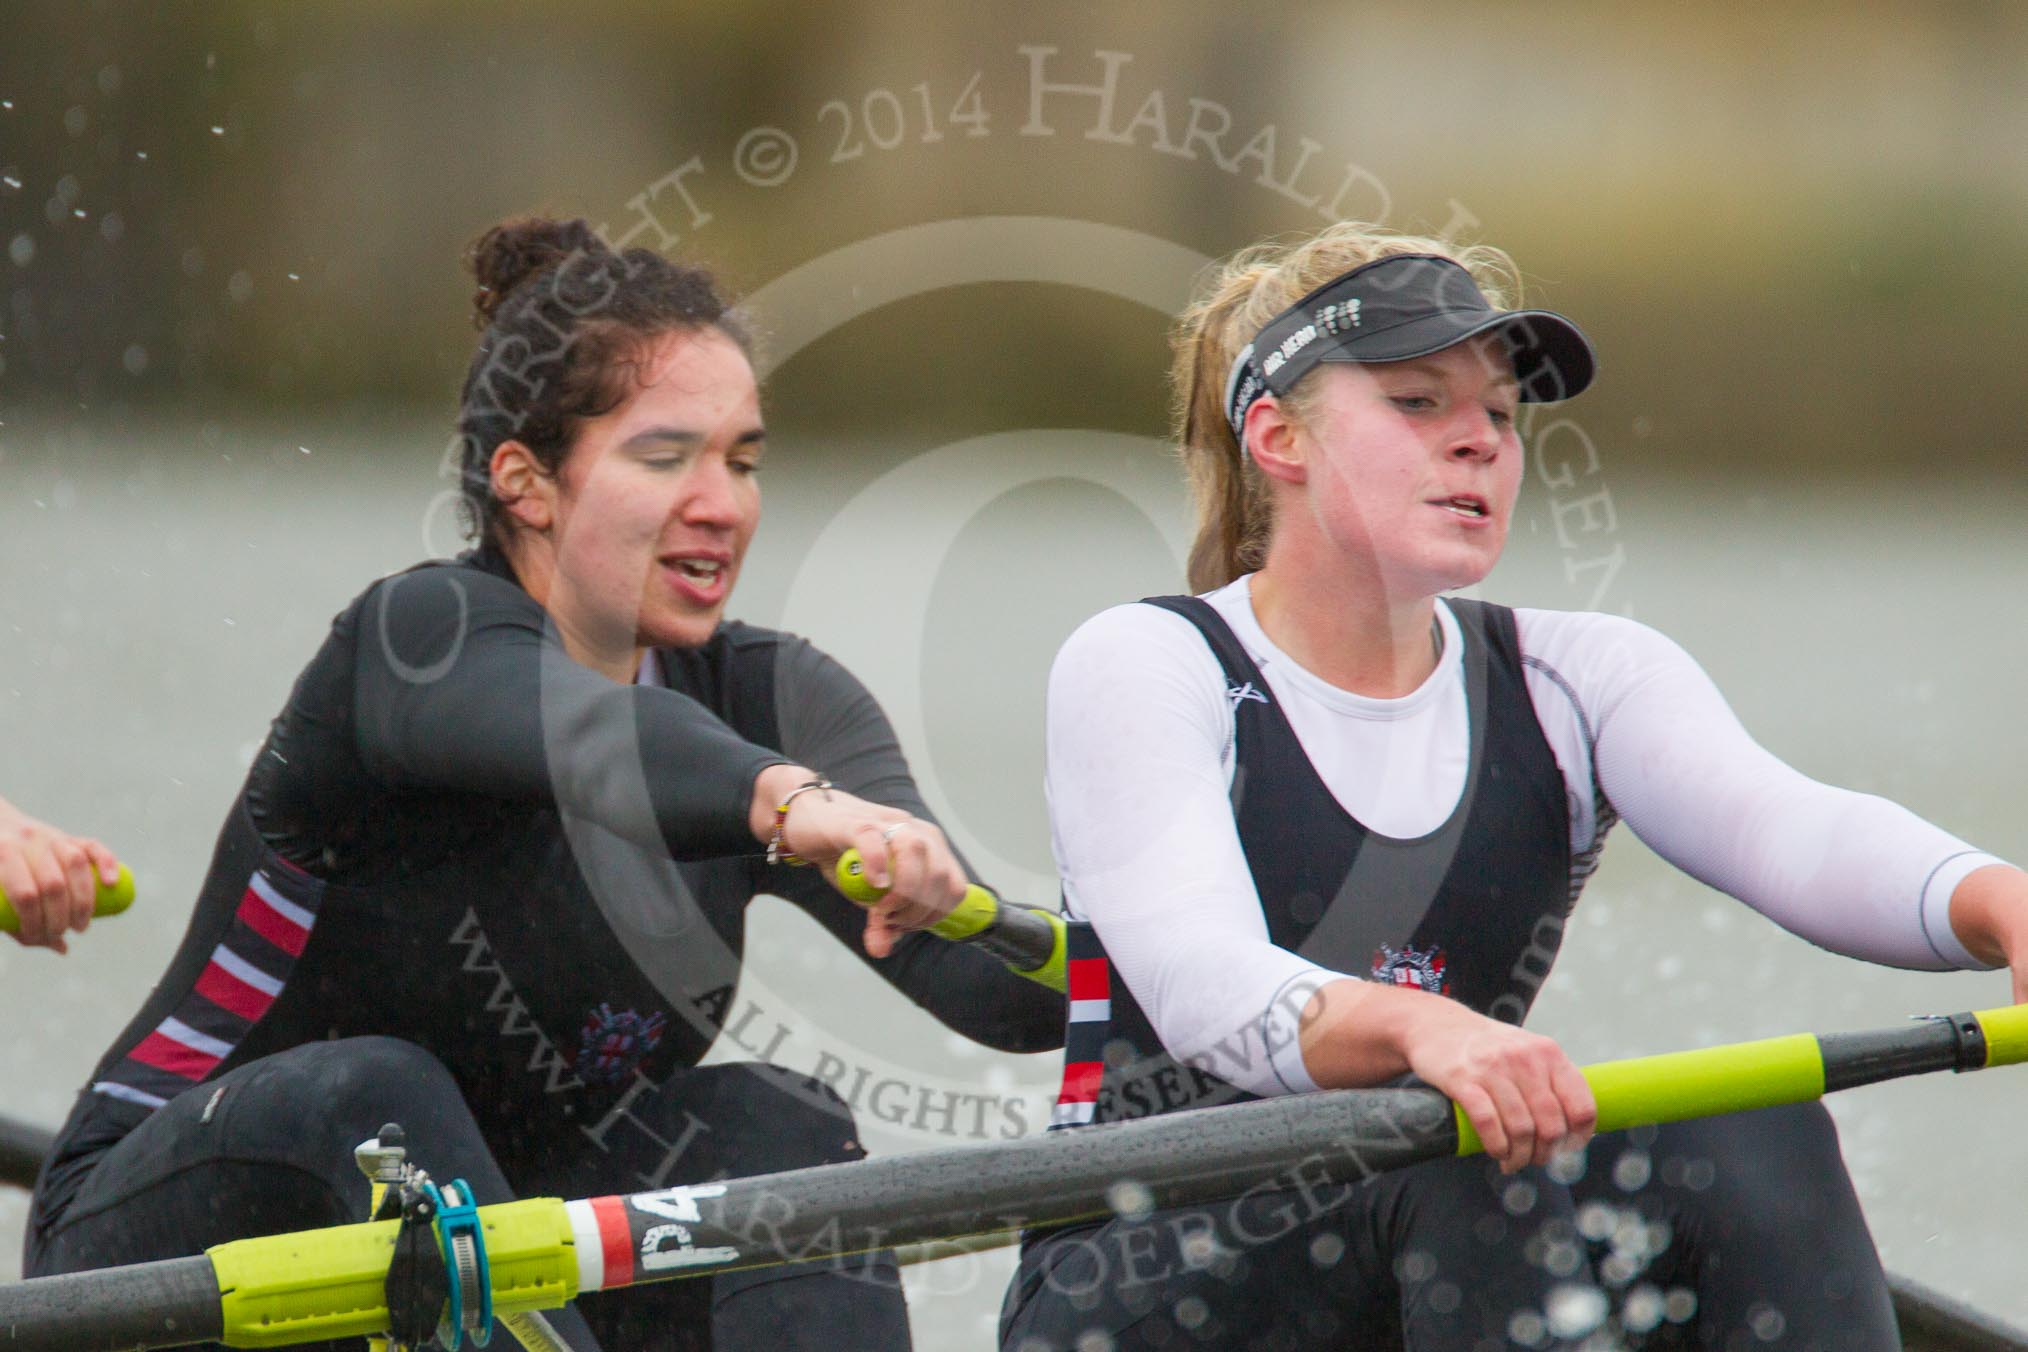 The Boat Race season 2014 - fixture CUWBC vs Thames RC.




on 02 March 2014 at 14:02, image #178